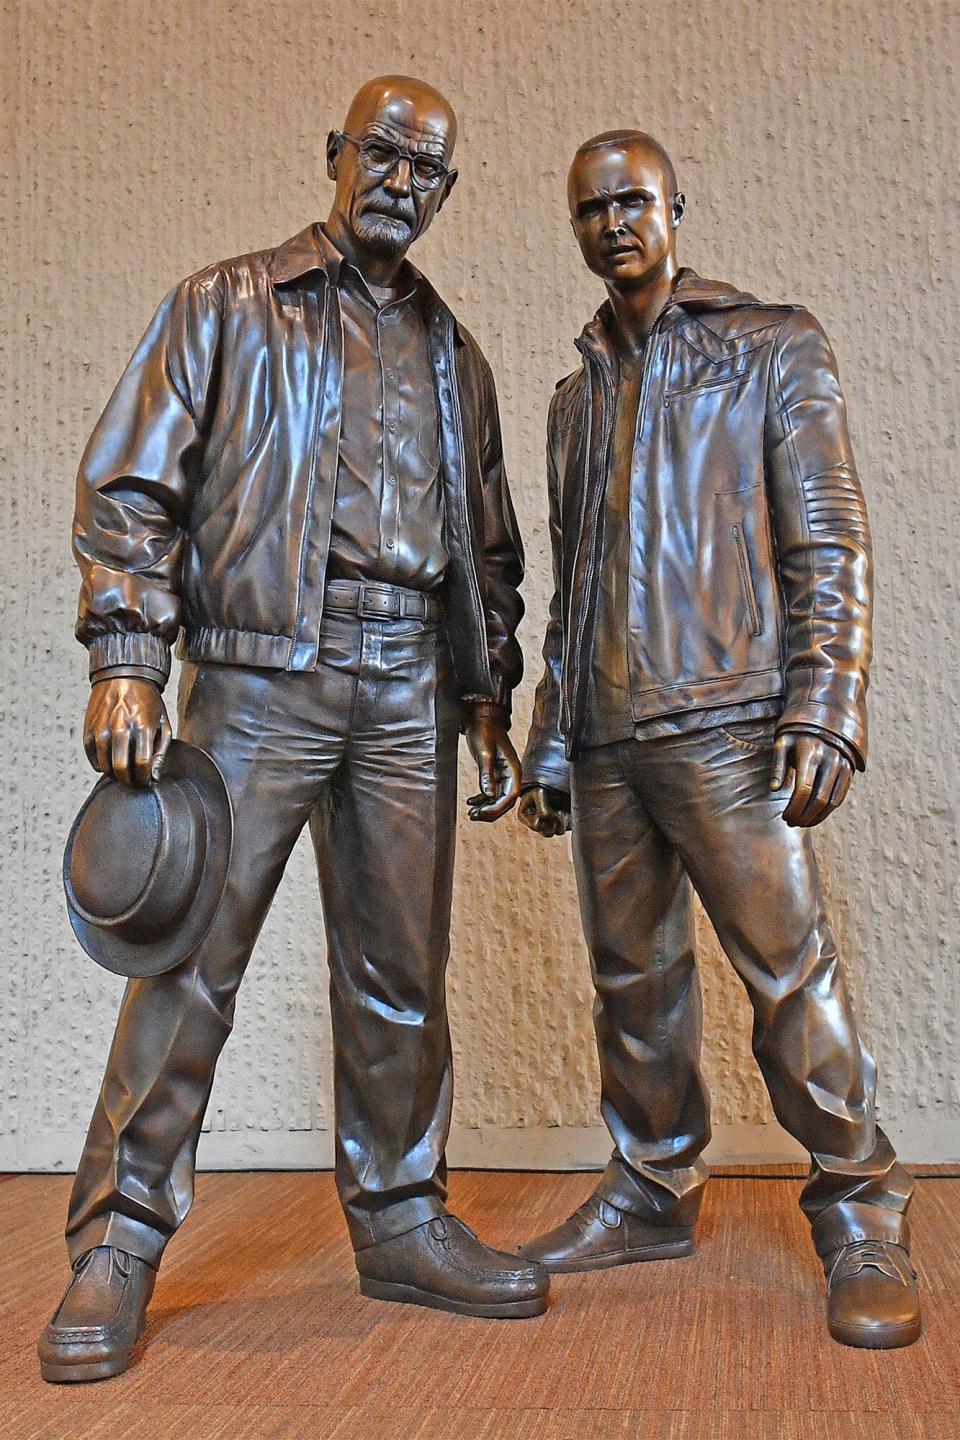 ALBUQUERQUE, NEW MEXICO - JULY 29: Bronze statues depicting television characters Walter White, played by actor Bryan Cranston, and Jesse Pinkman, played by actor Aaron Paul, from the series "Breaking Bad" are displayed after an unveiling ceremony at the Albuquerque Convention Center on July 29, 2022 in Albuquerque, New Mexico. The statues were commissioned in 2019 by Sony Pictures Television and were sculpted by artist Trevor Grove and cast by Burbank, California-based American Fine Arts Foundry. (Photo by Sam Wasson/Getty Images)